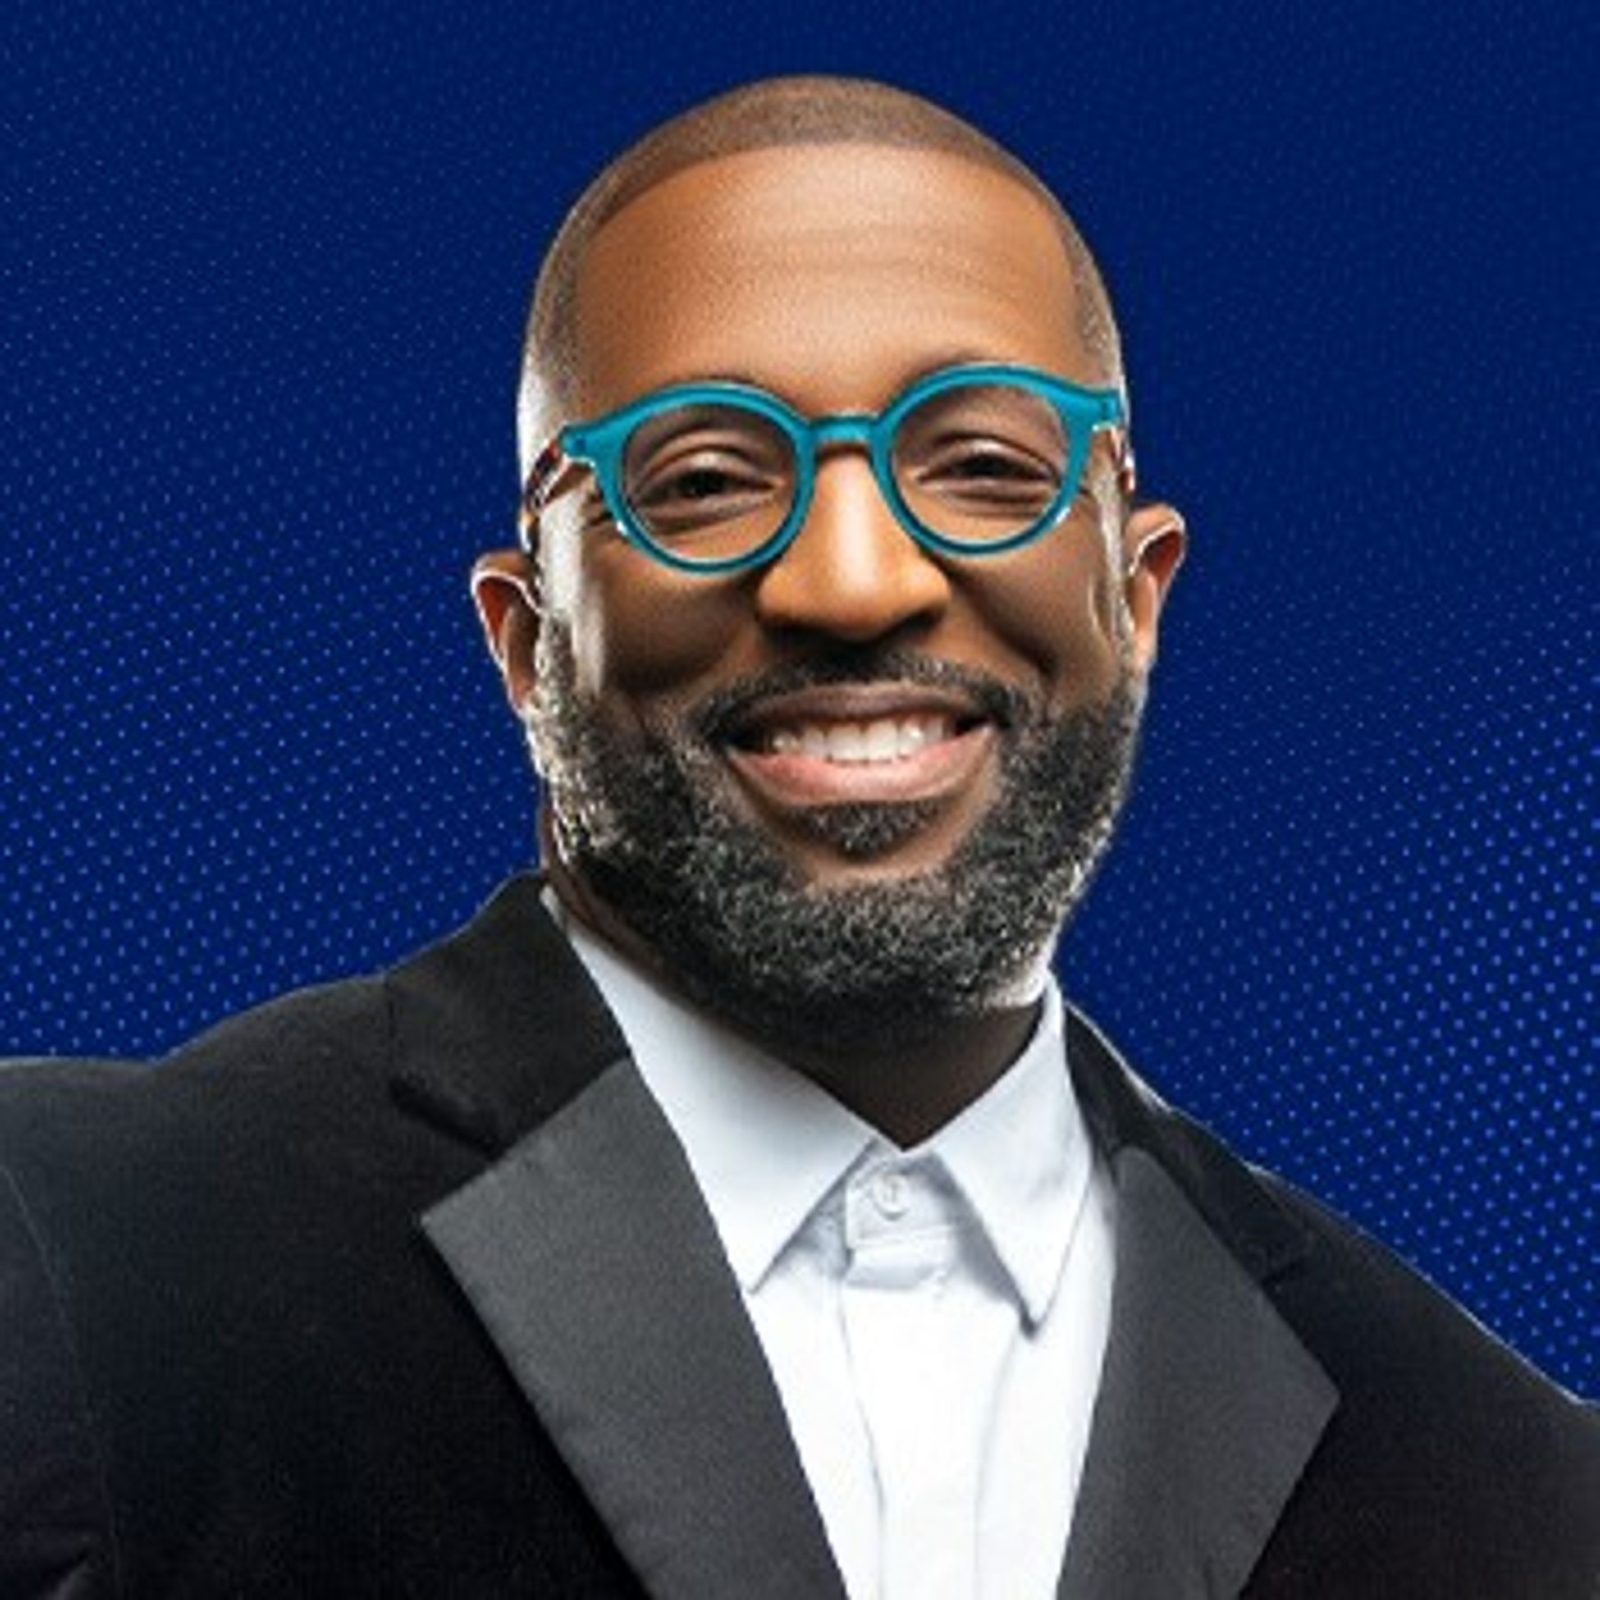 Who Is Rickey Smiley Dating